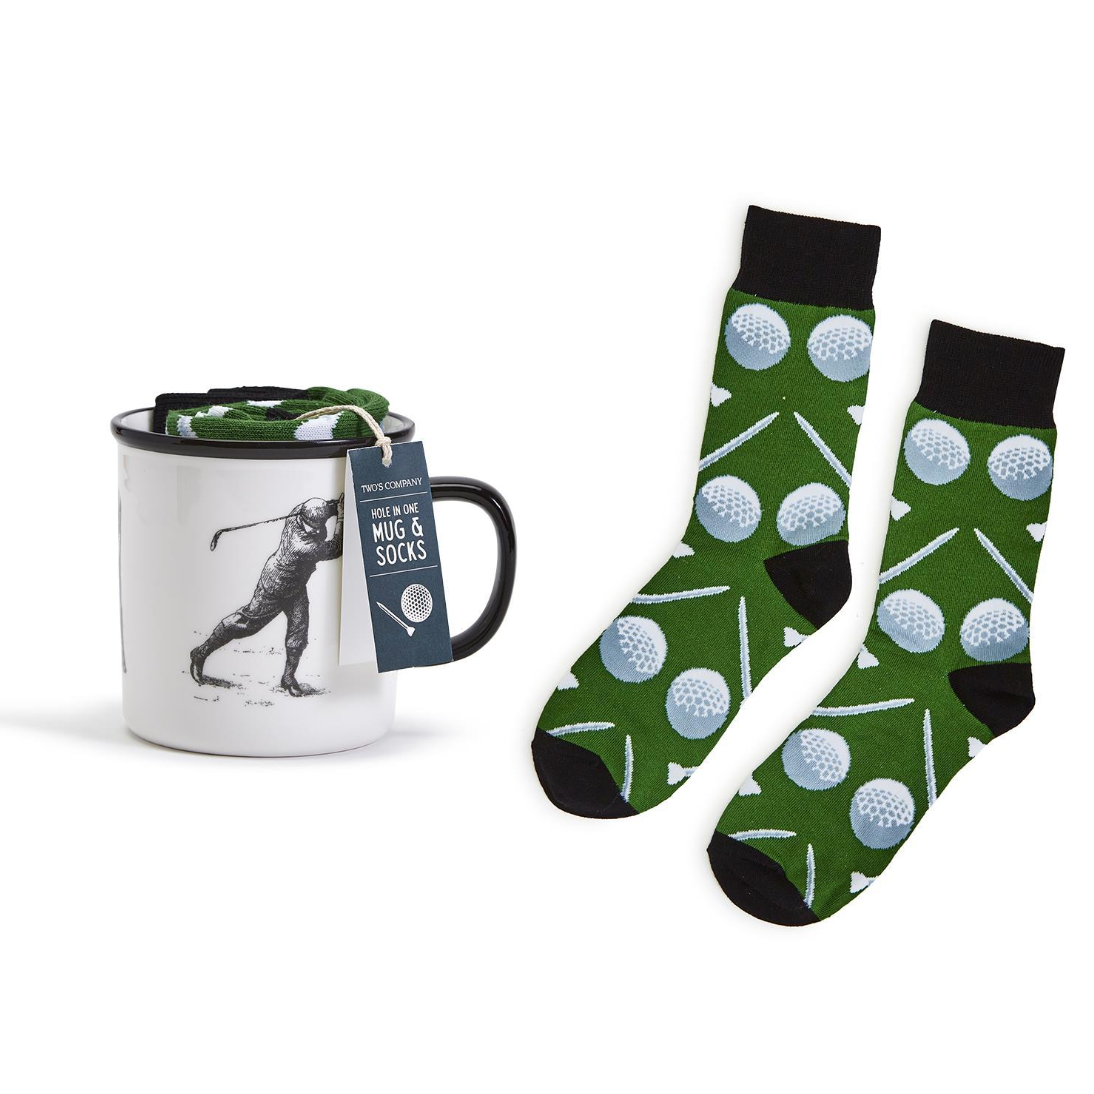 Hole-In-One Mug and Pair of Socks Set